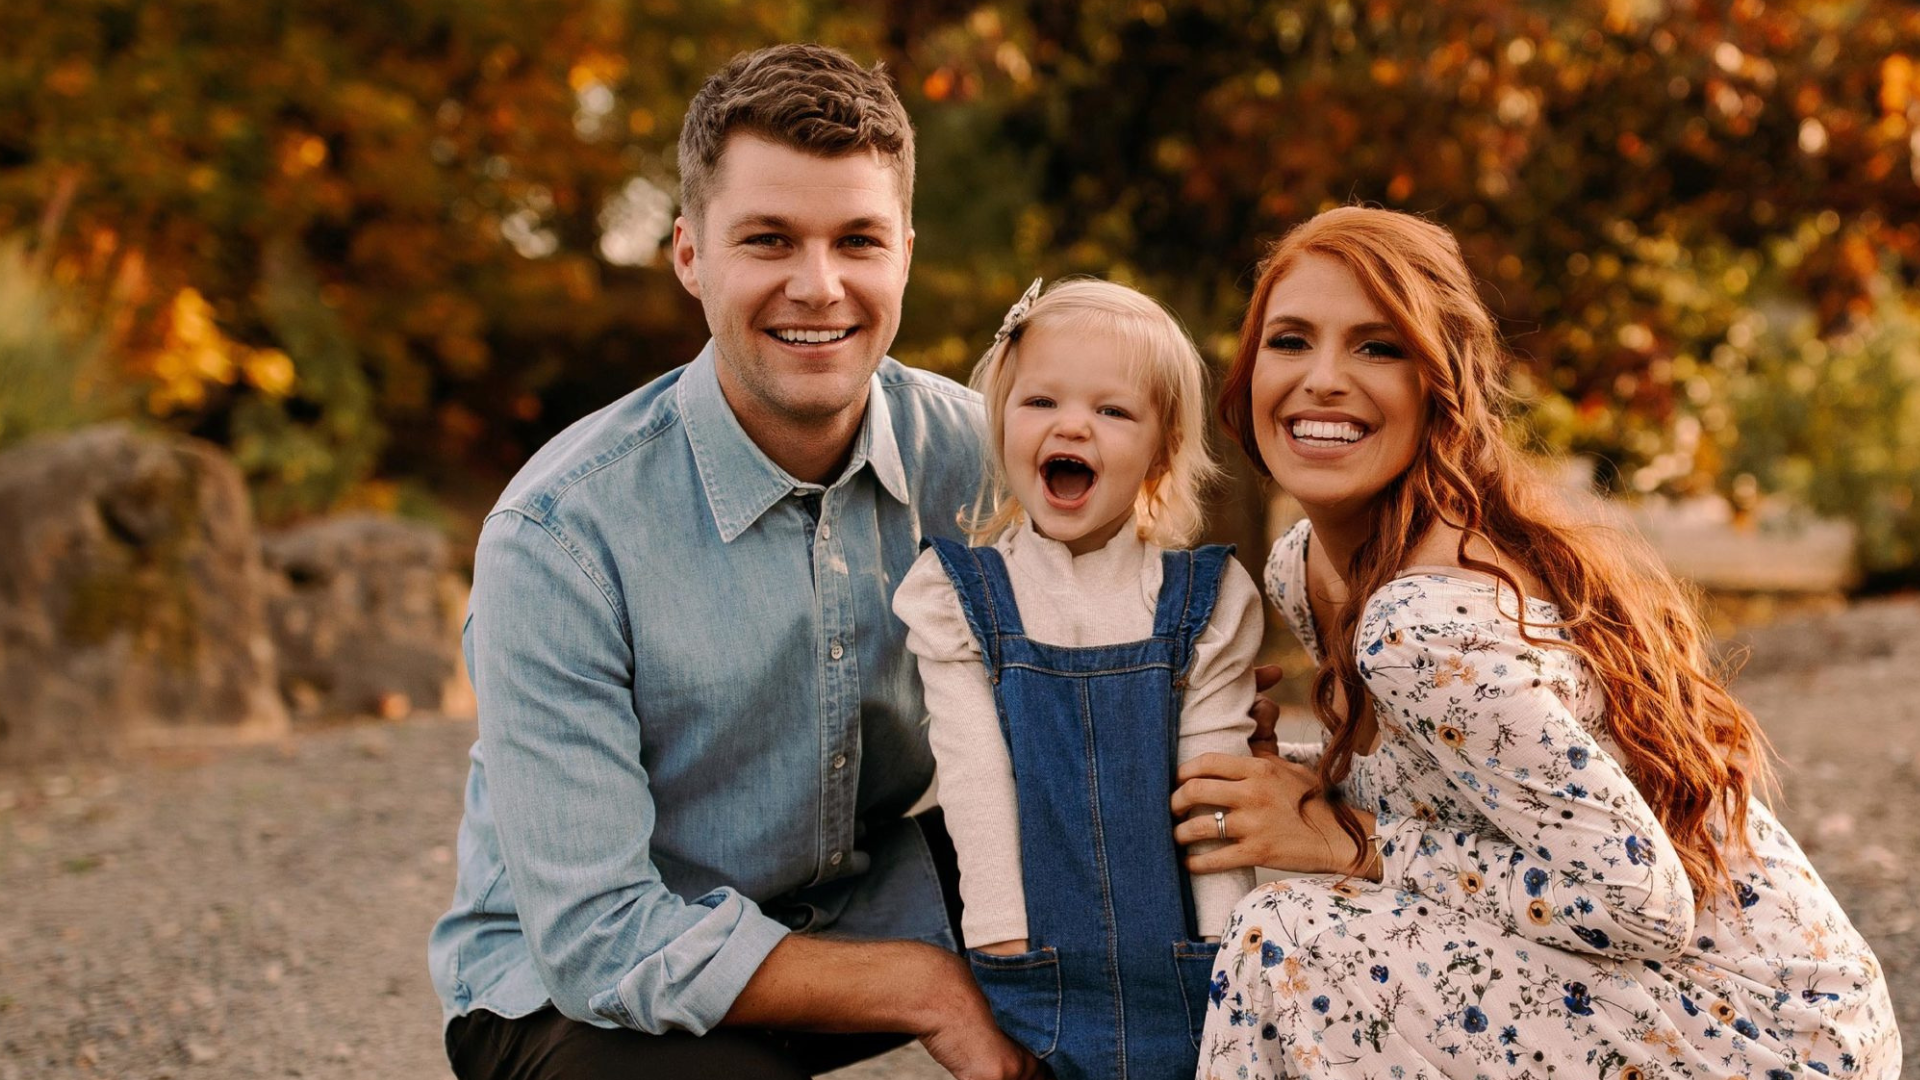 ‘LPBW’: Fans Think Audrey Roloff Is Lying About Having Natural Red Hair